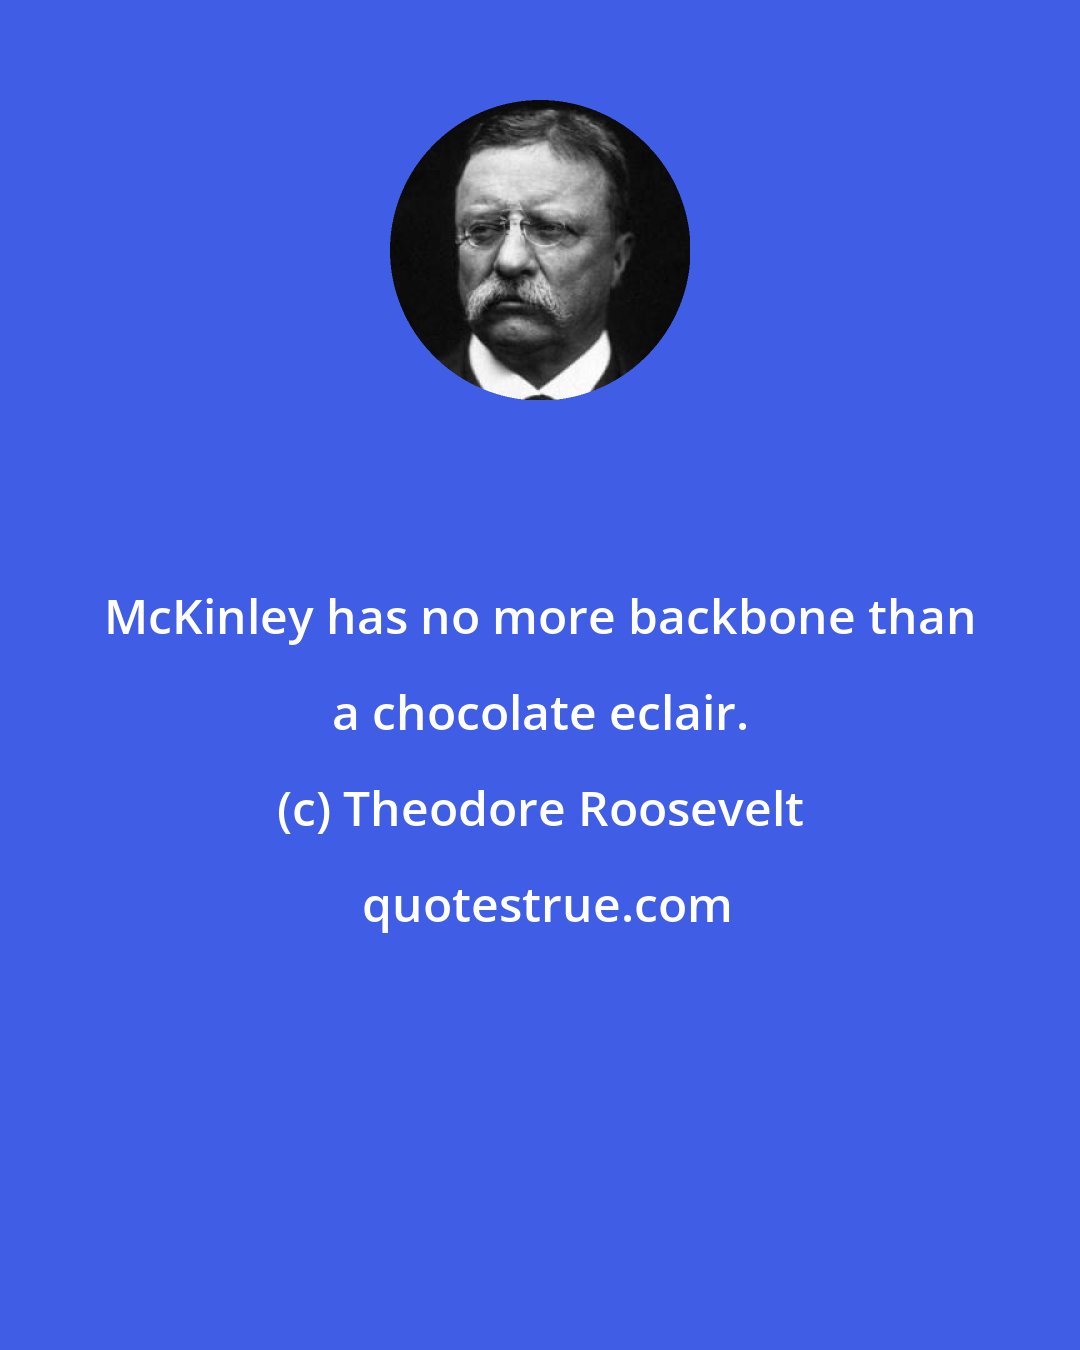 Theodore Roosevelt: McKinley has no more backbone than a chocolate eclair.